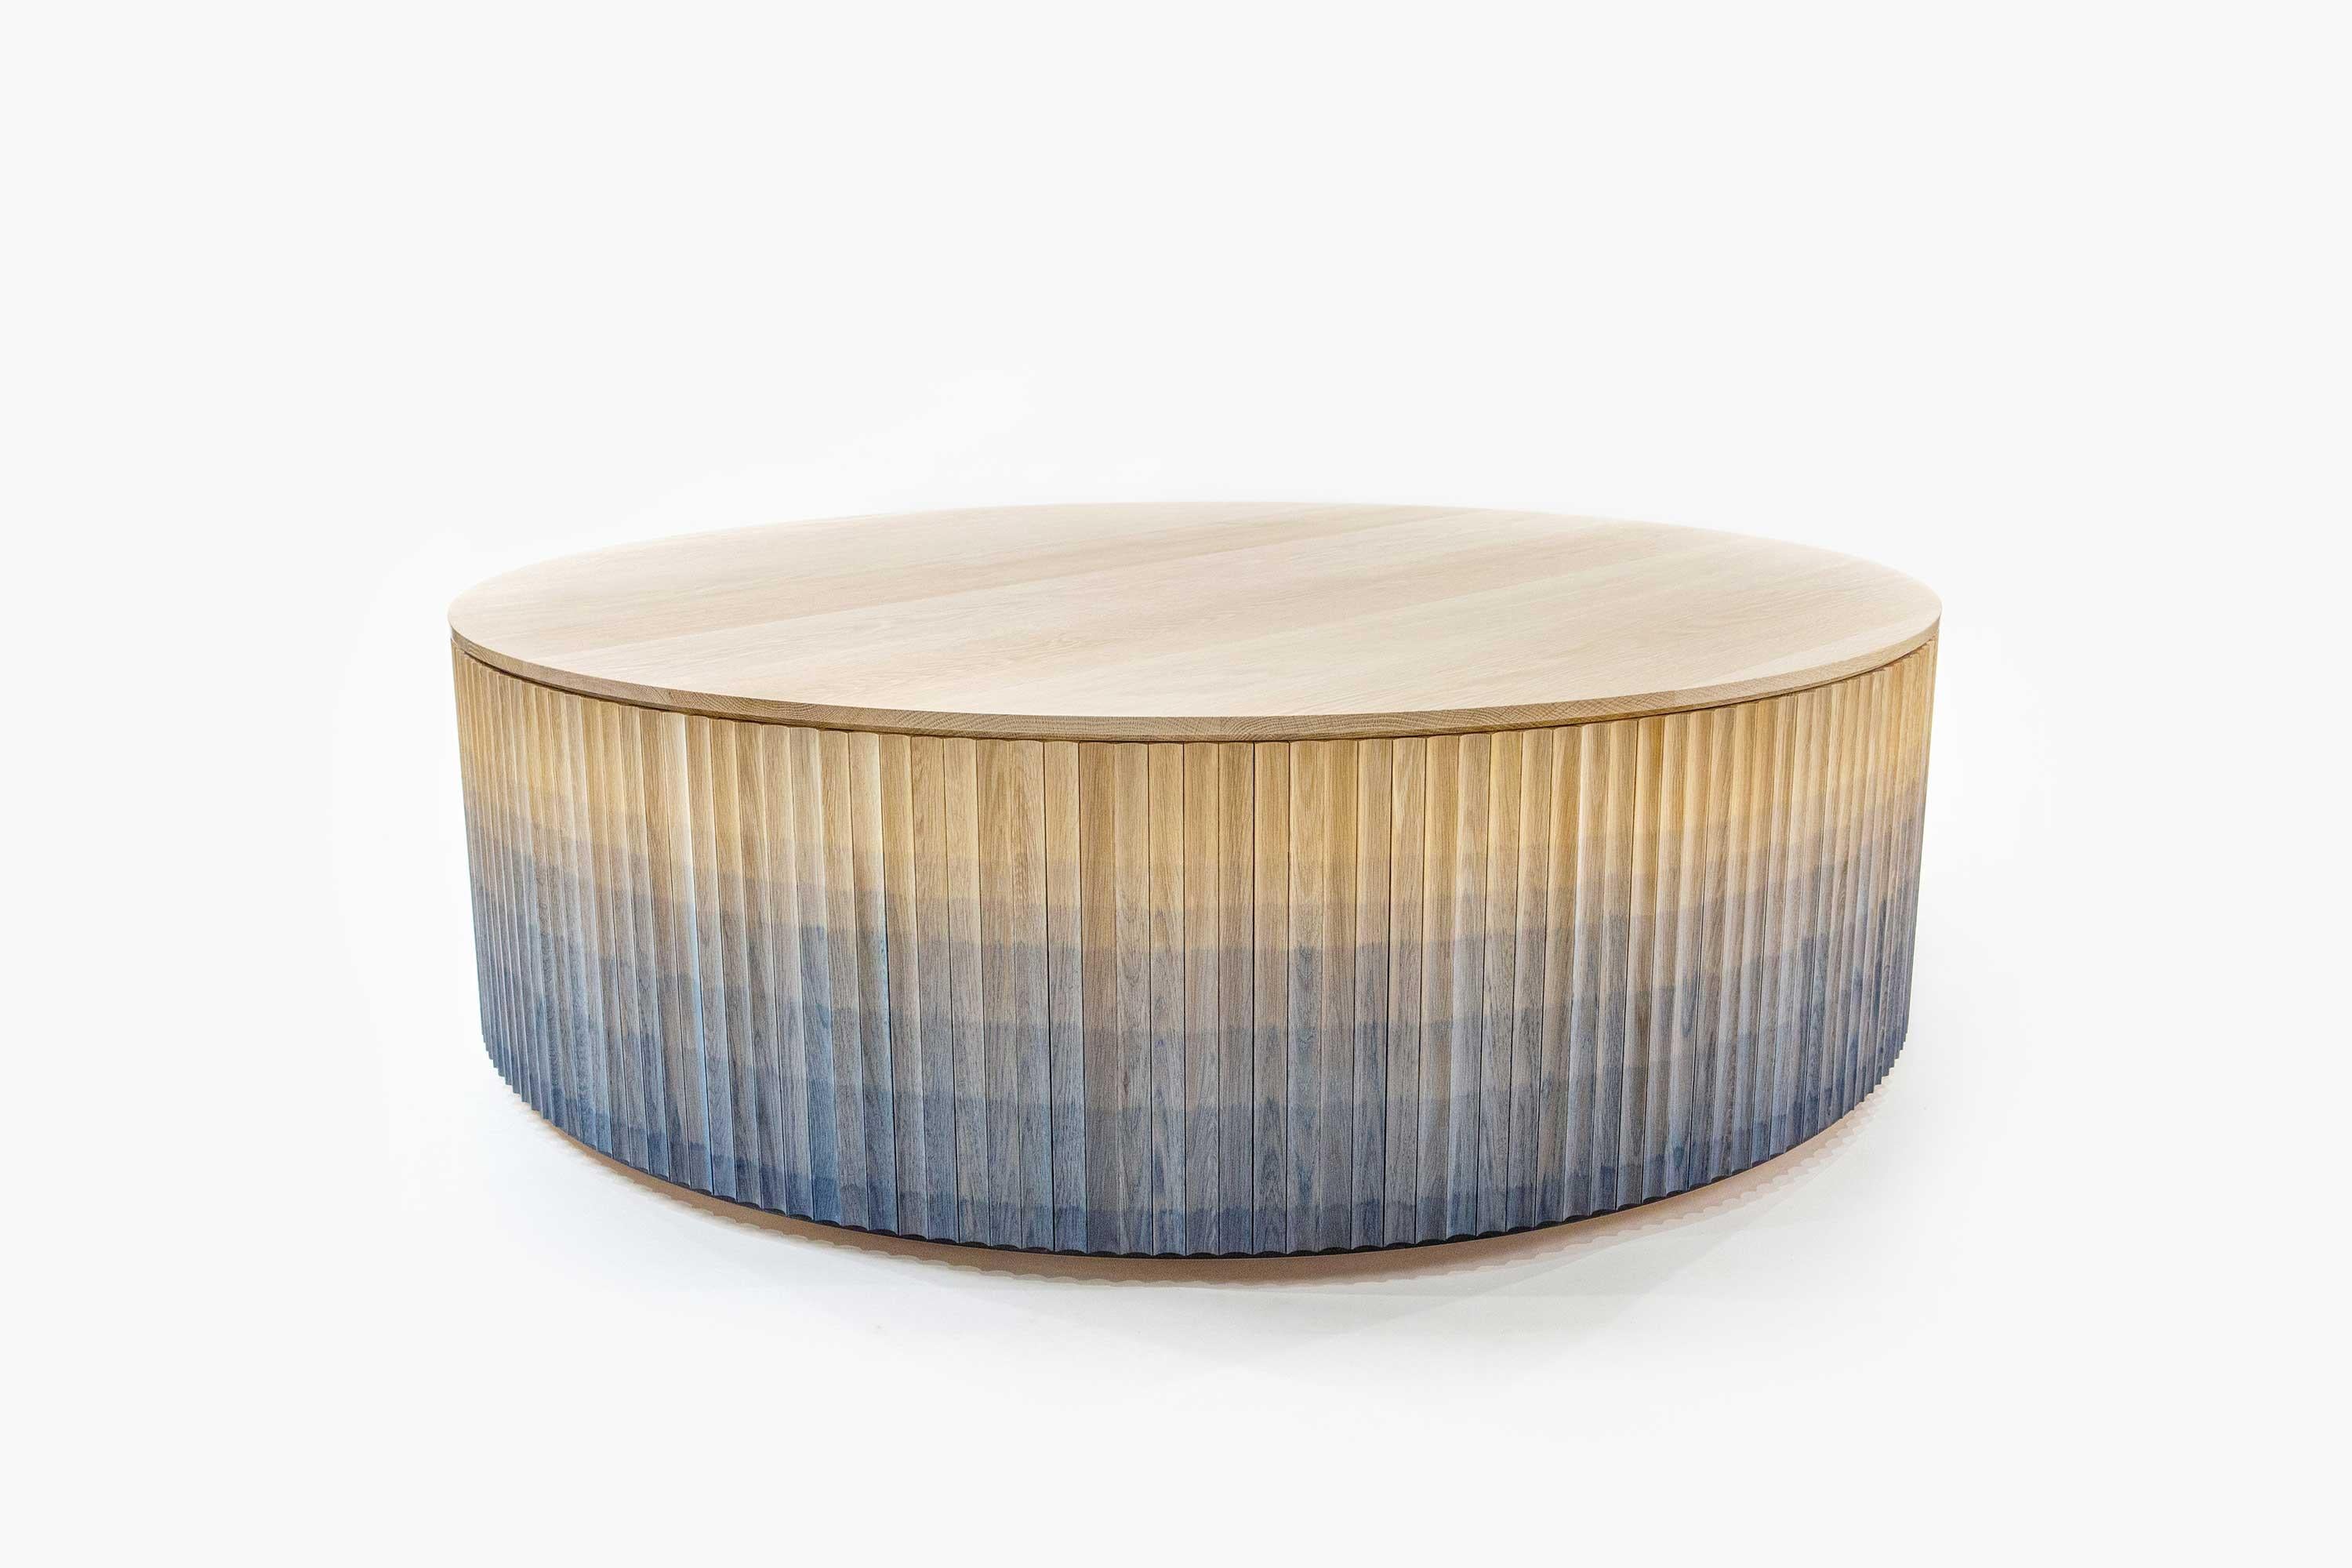 Pilar coffee table by Indo Made
One of a kind
Dimensions: Ø132.1 X H38.1 cm 
Materials: Oak with Cobalt Blue ombre finish.

Also available in other colors and materials.
Each piece is carefully handcrafted by our team using natural materials